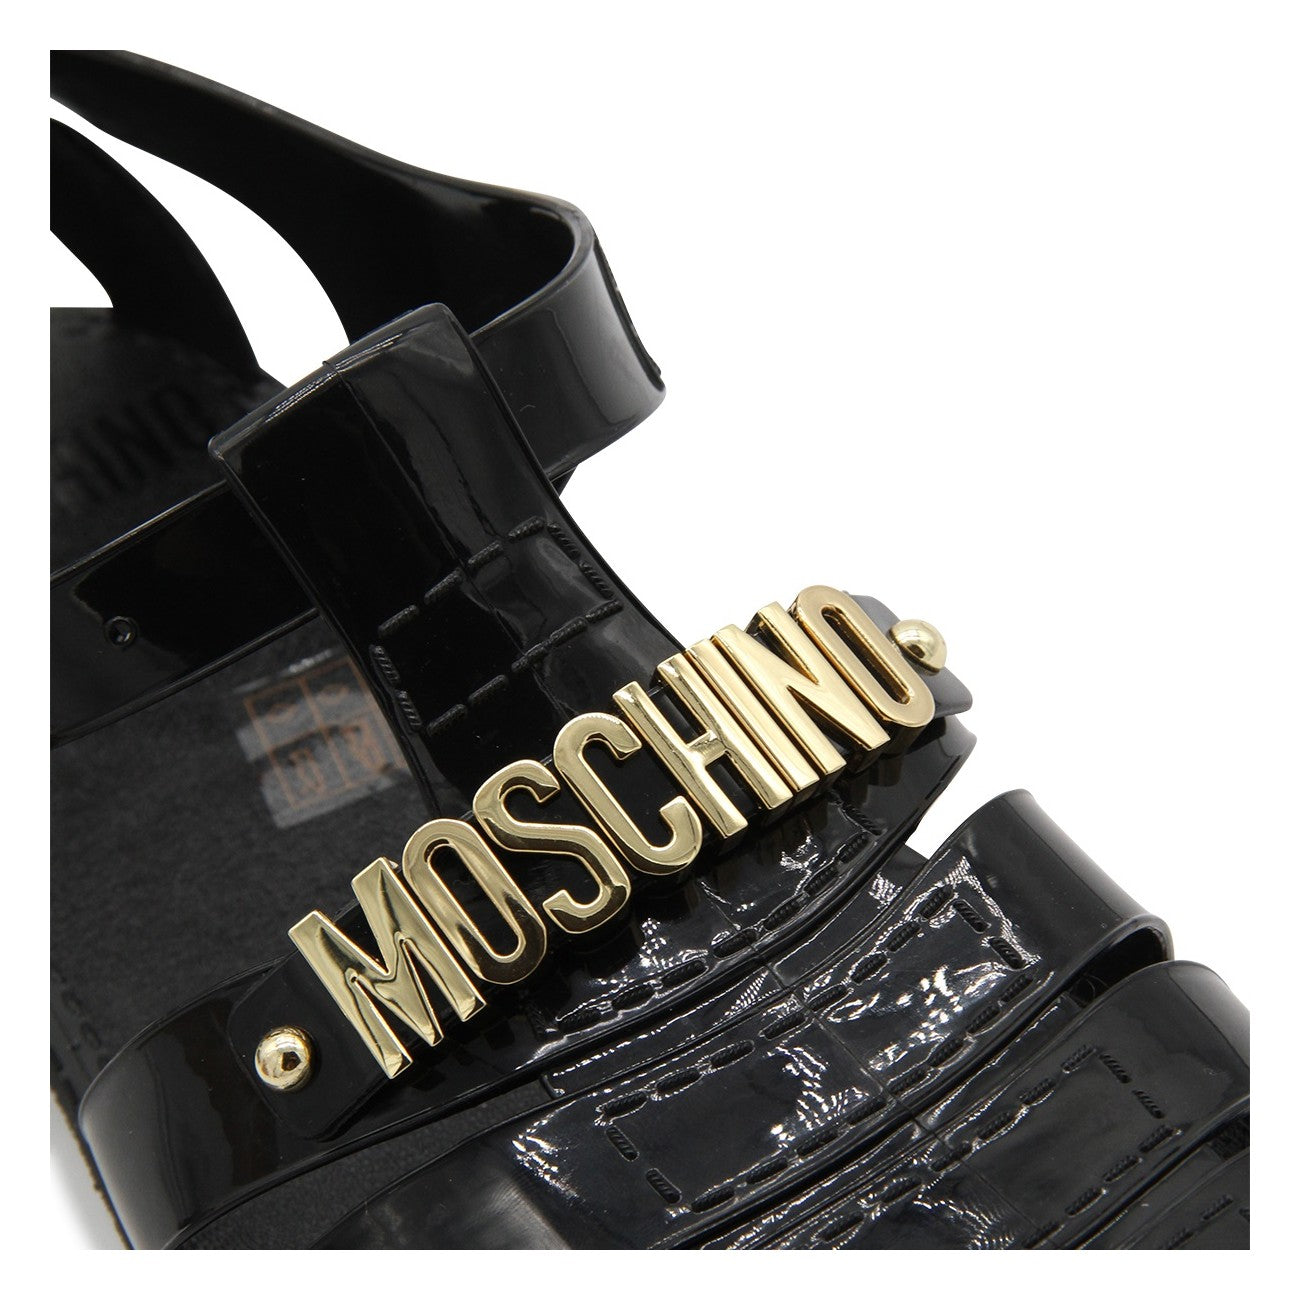 Moschino Back Rubber Sandals